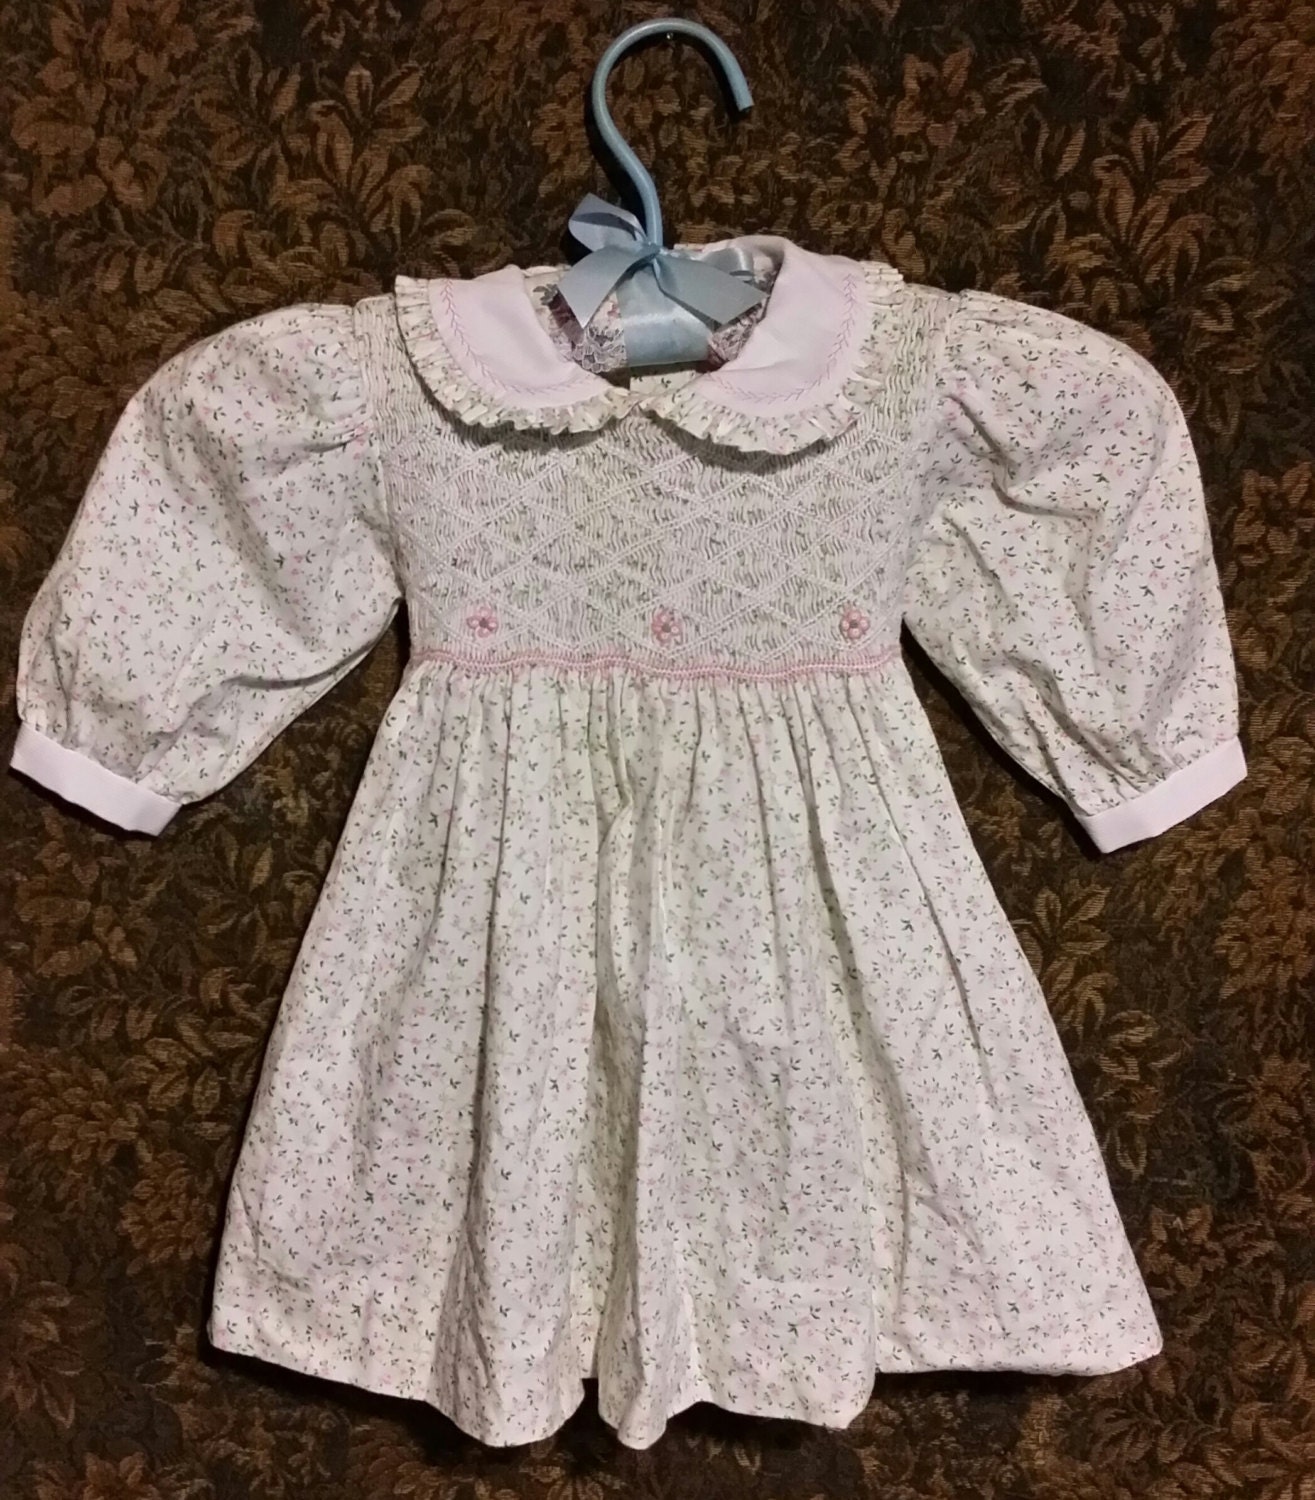 Little baby girl vintage smocked top dress adorned with tiny